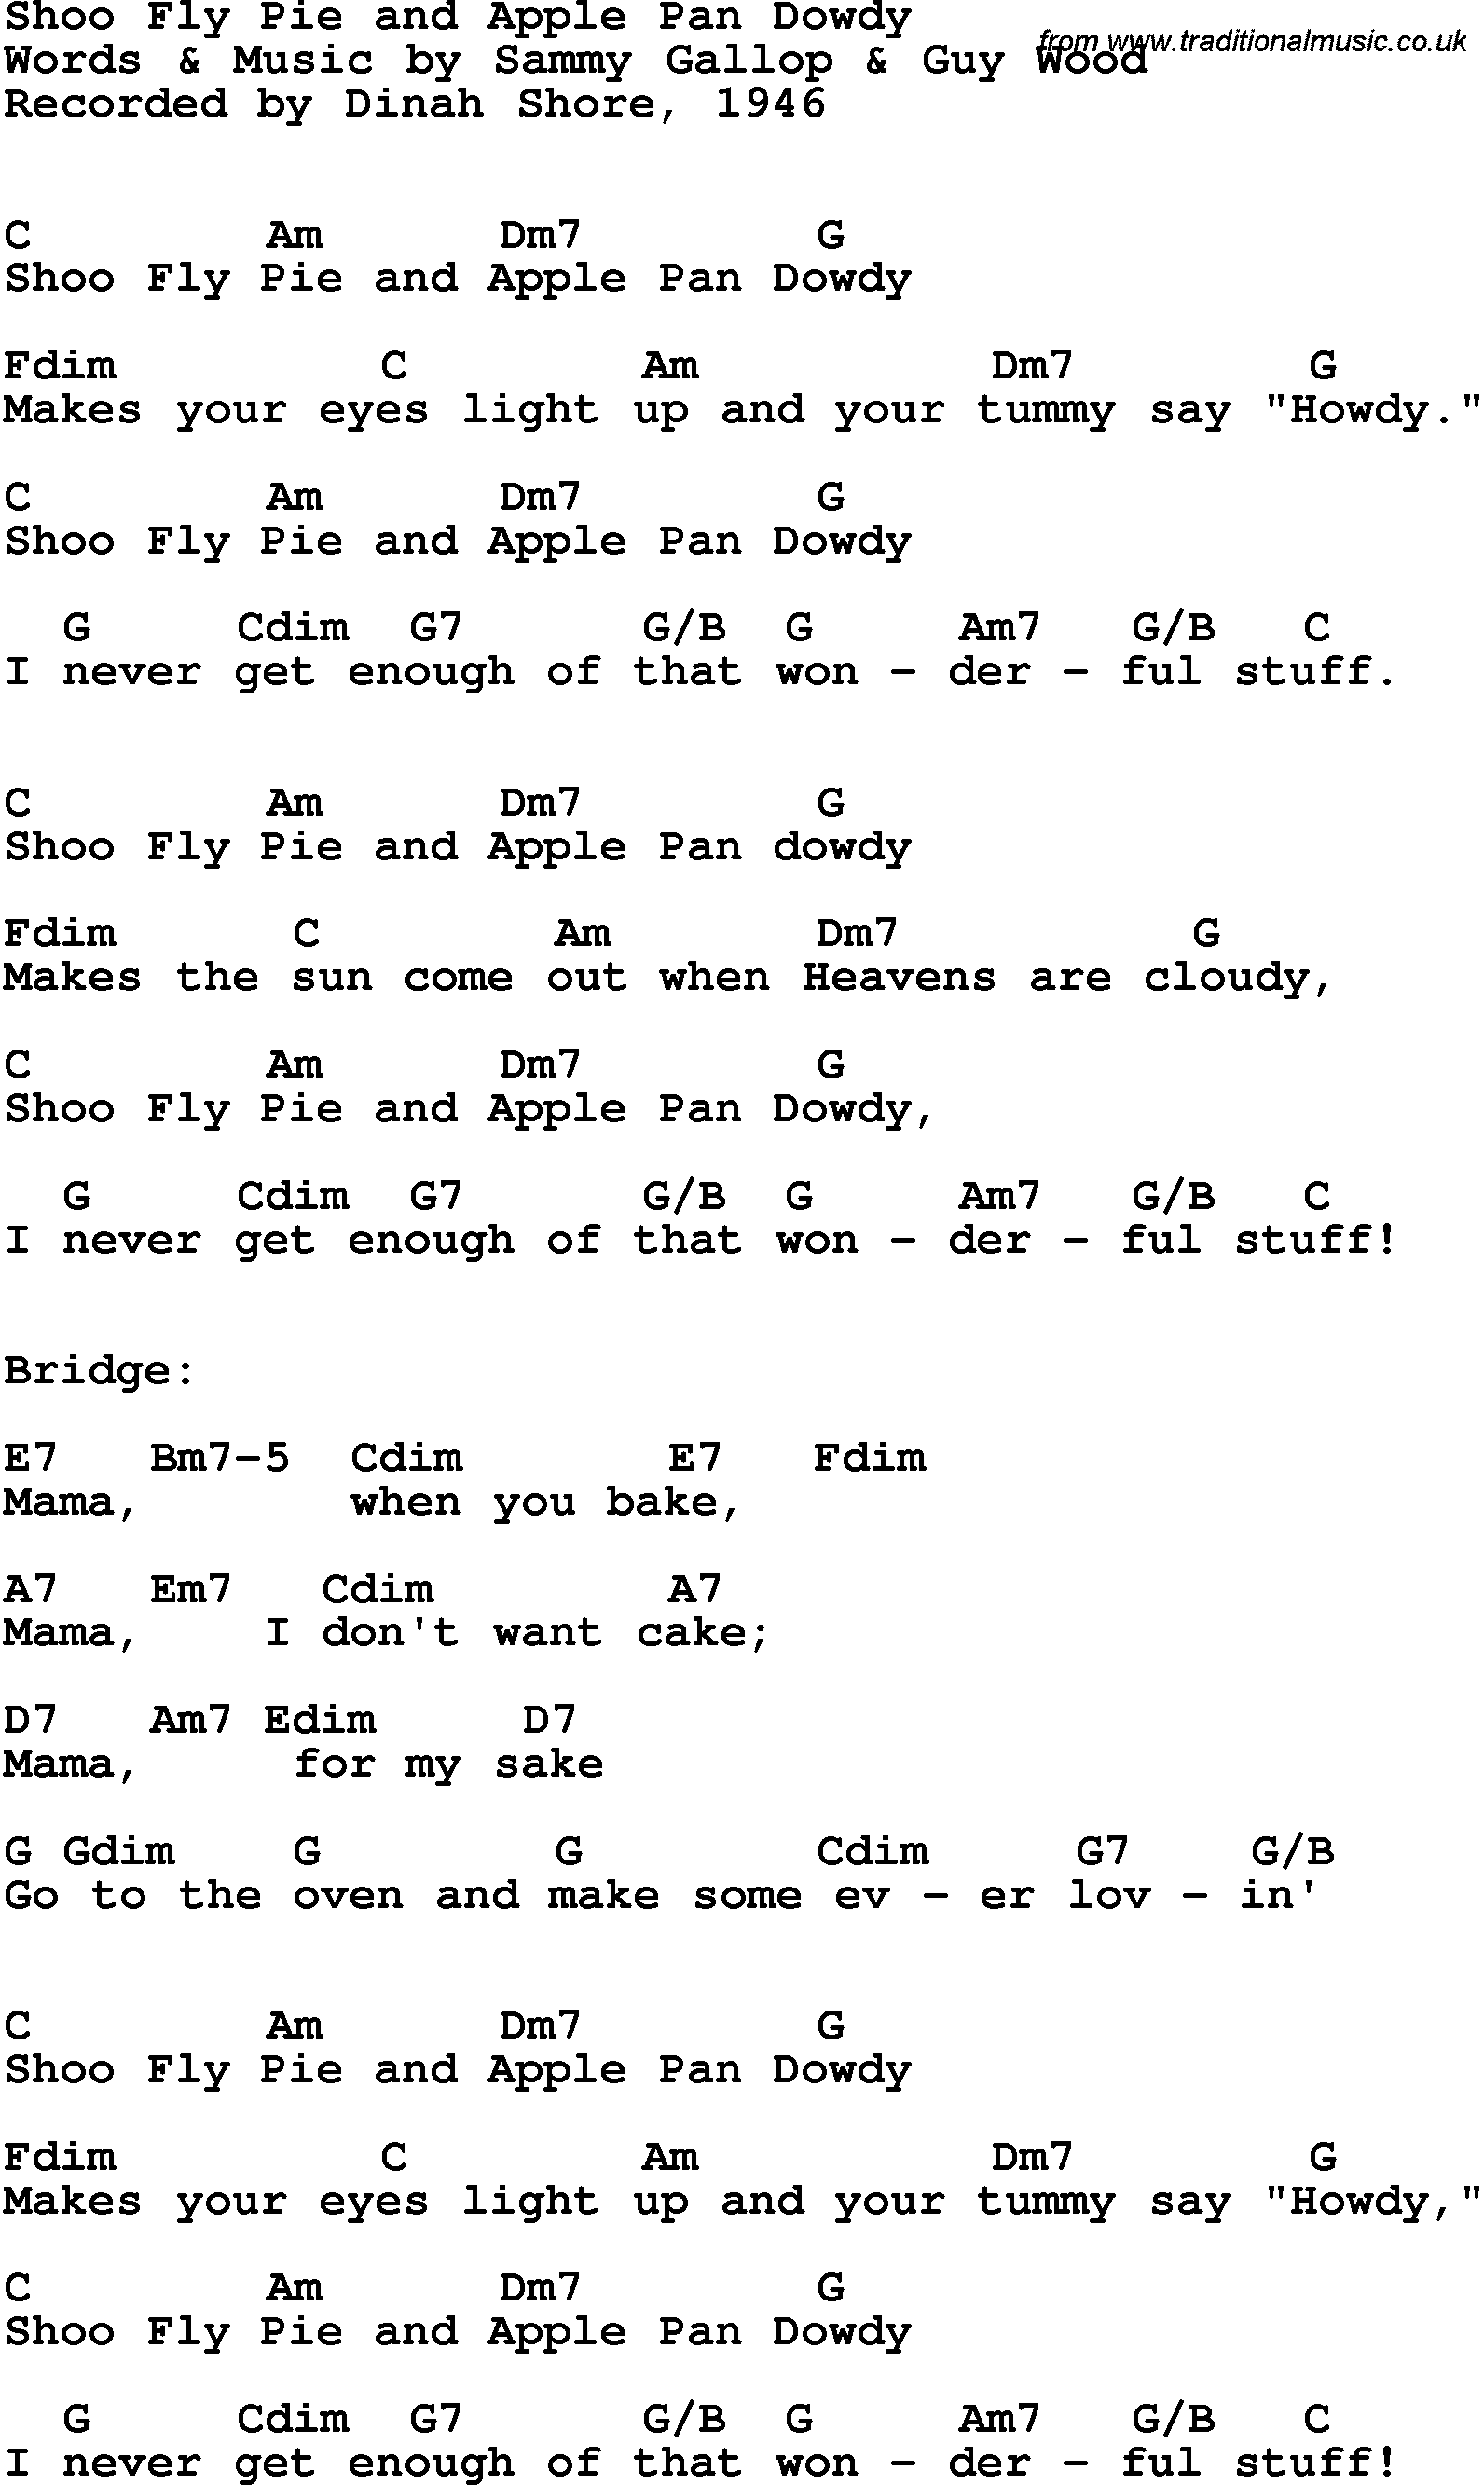 Song Lyrics with guitar chords for Shoo Fly Pie - Dinah Shore, 1945